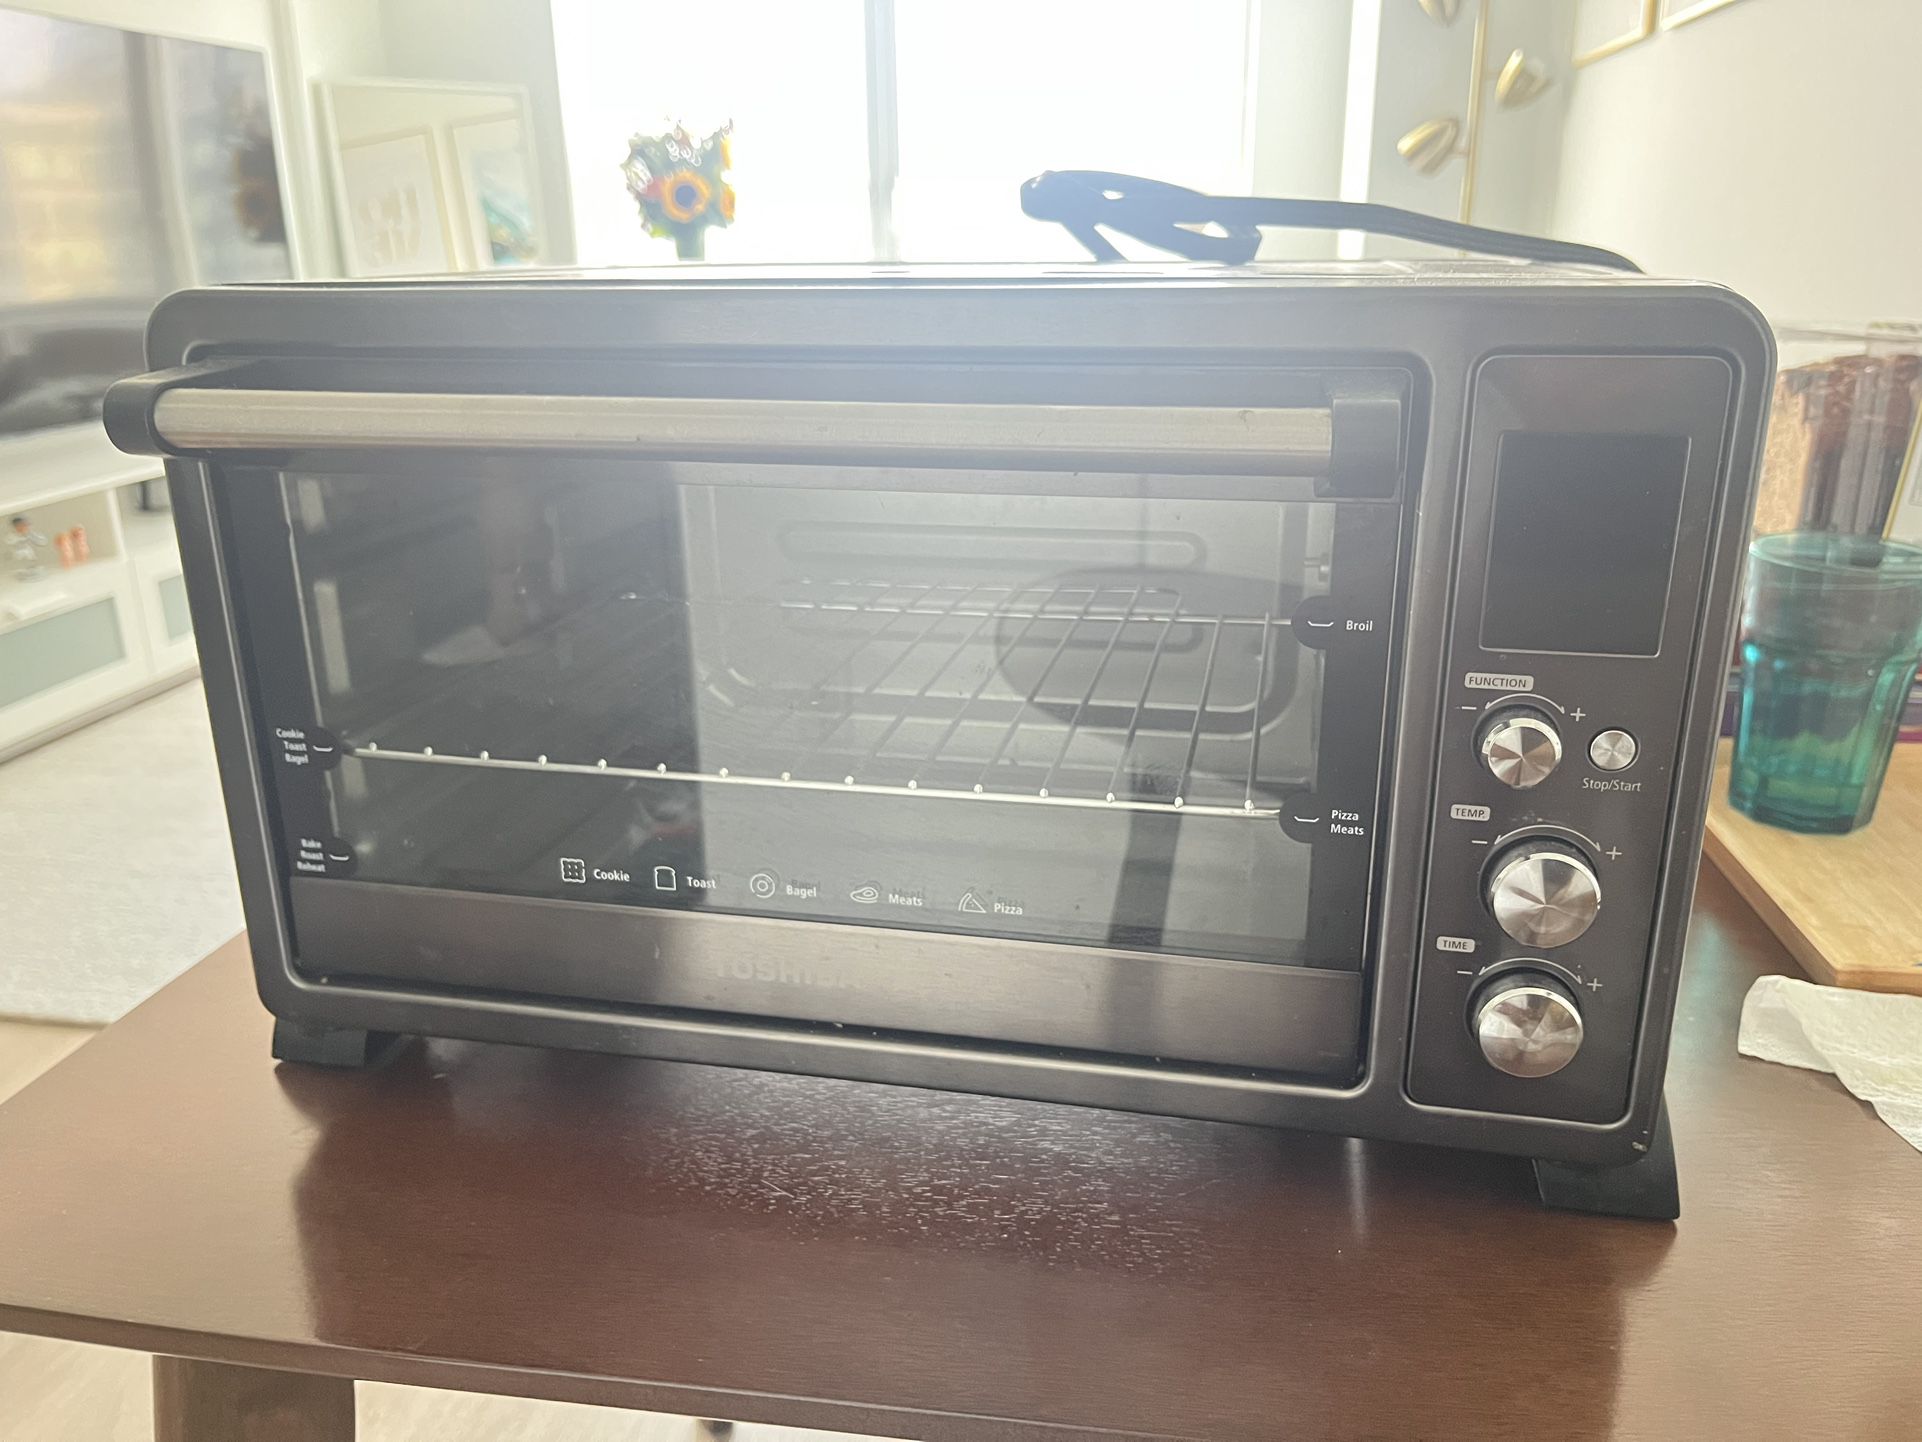 Toshiba Digital Convention Toaster Oven [Pickup Only]